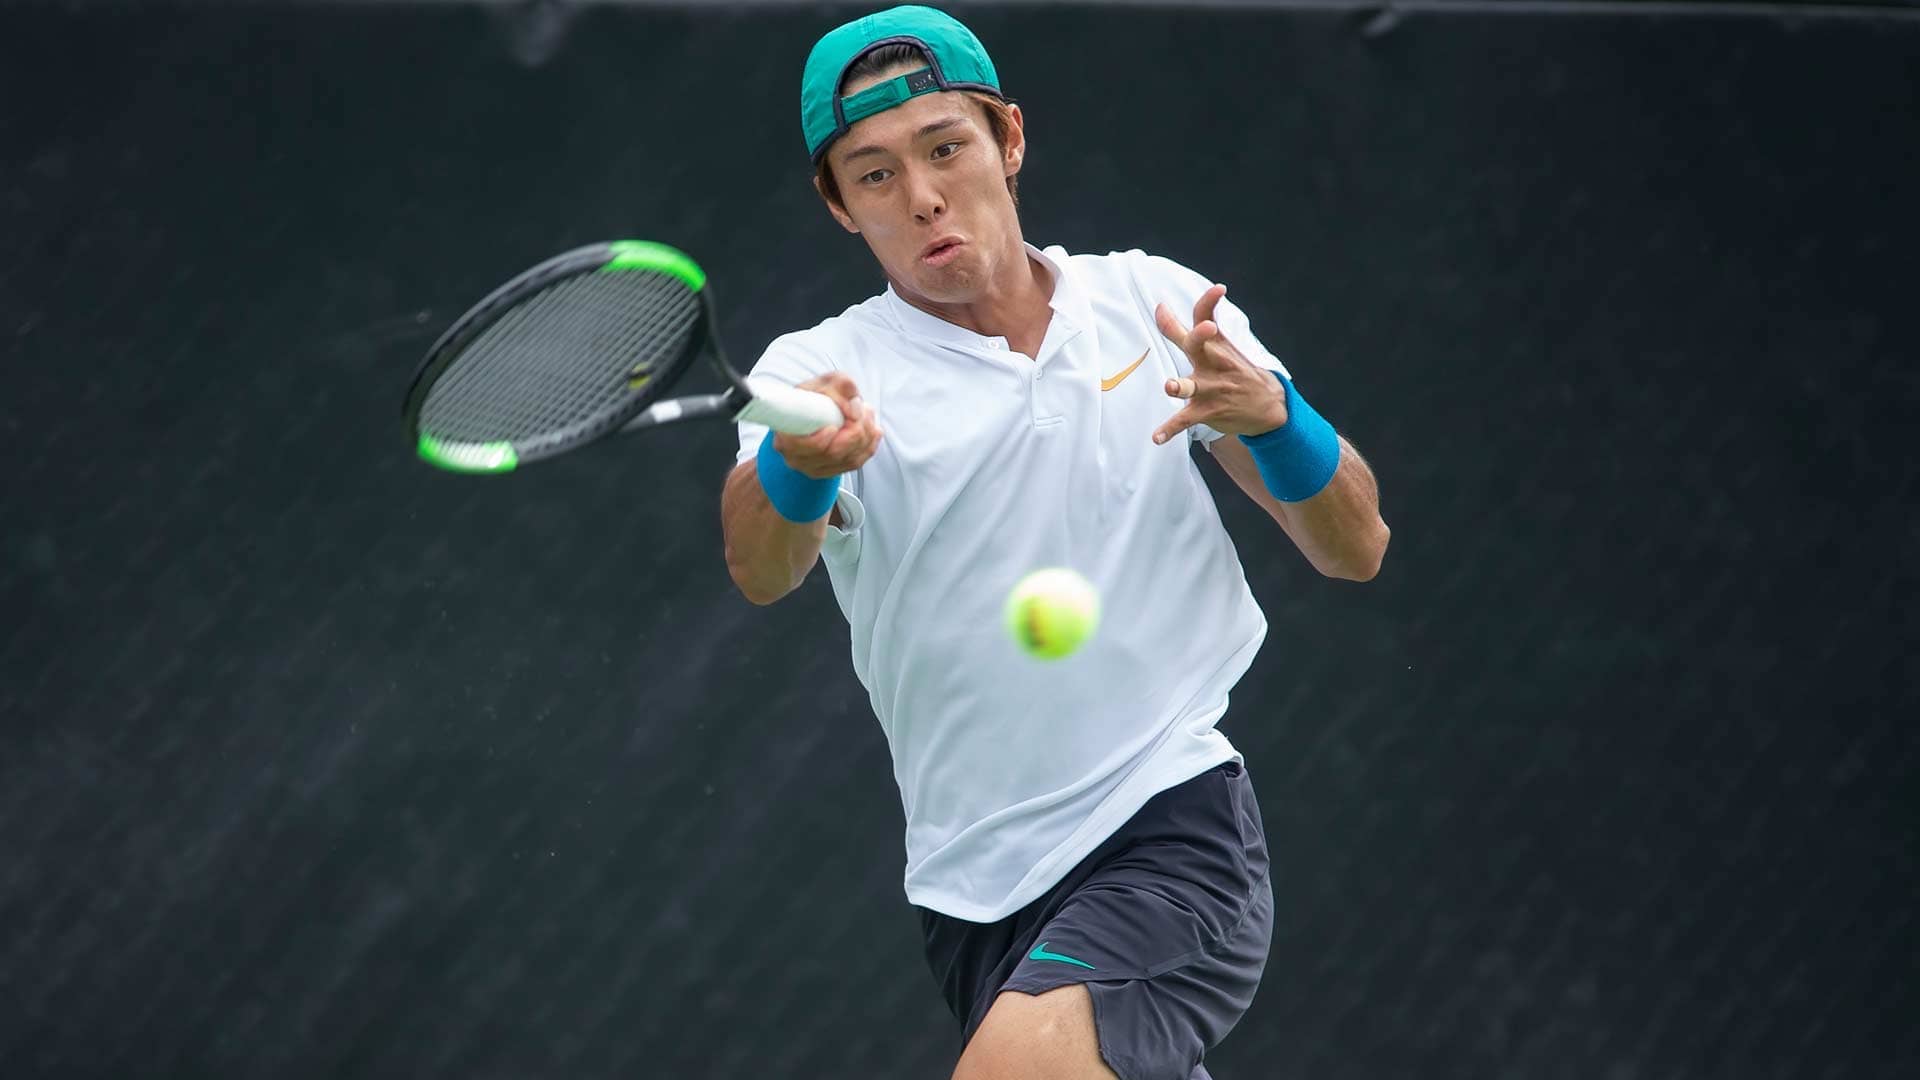 Duckhee Lee hits a forehand in Winston-Salem 2019